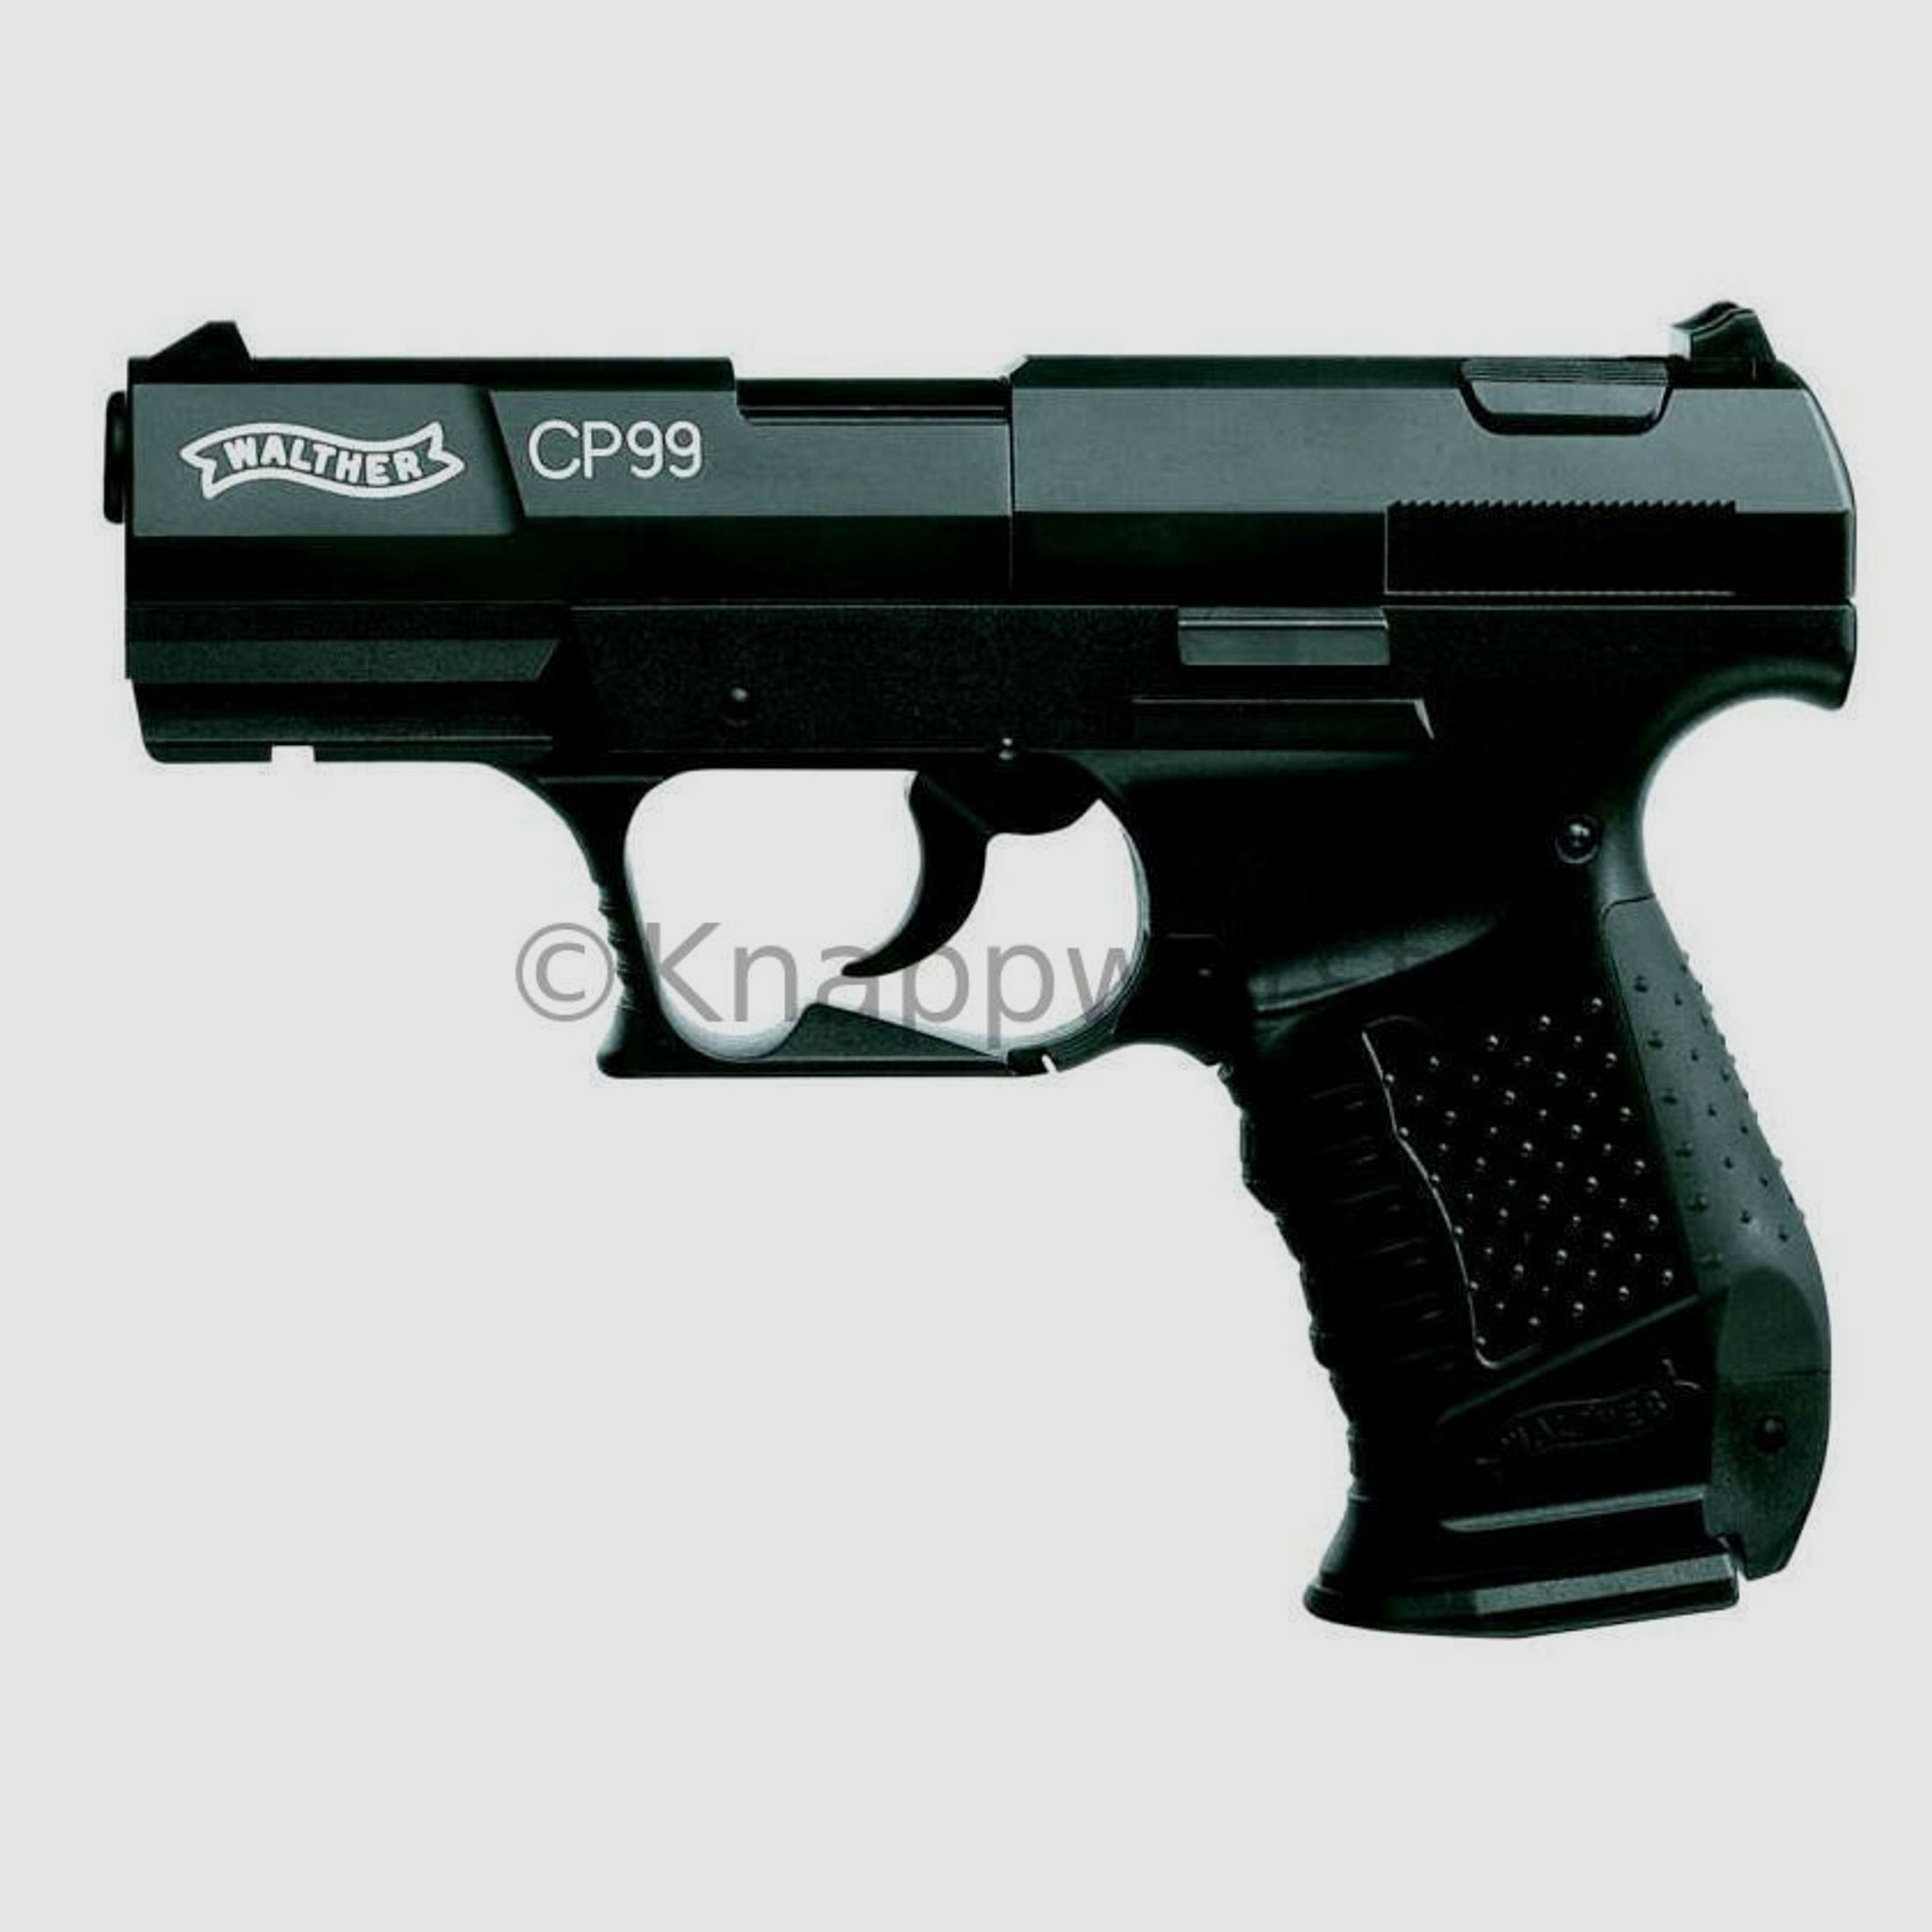 Umarex	 Luftpistole Walther CP99 CO2